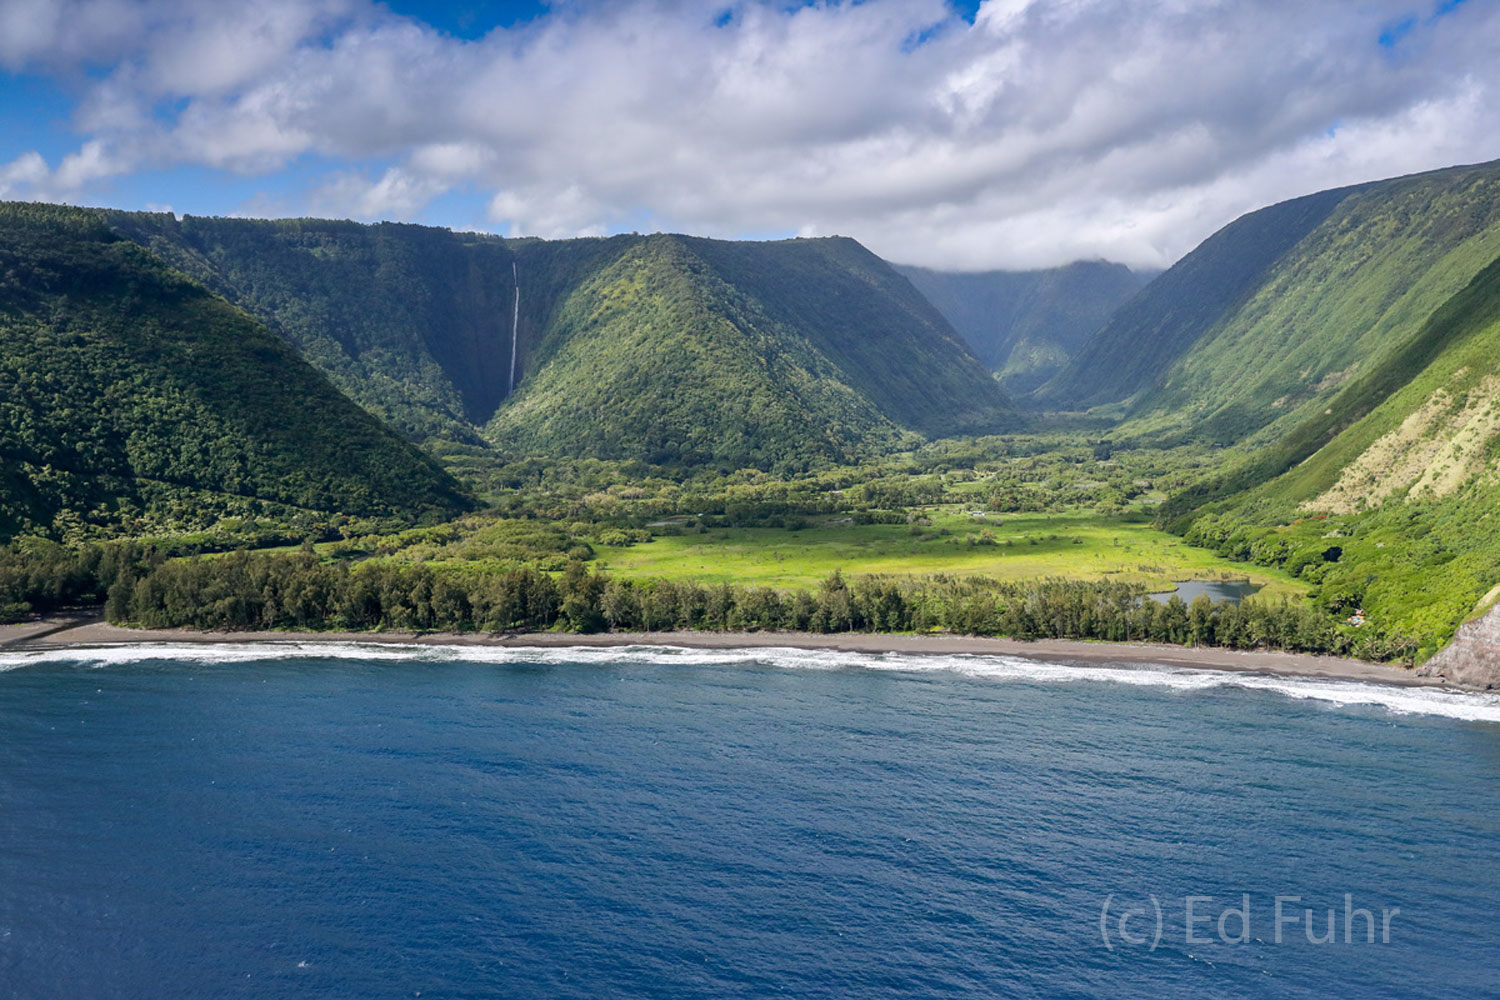 One of of 5 incredible valleys, the Waipio Valley is perhaps the island's most beautiful, at least from the air.